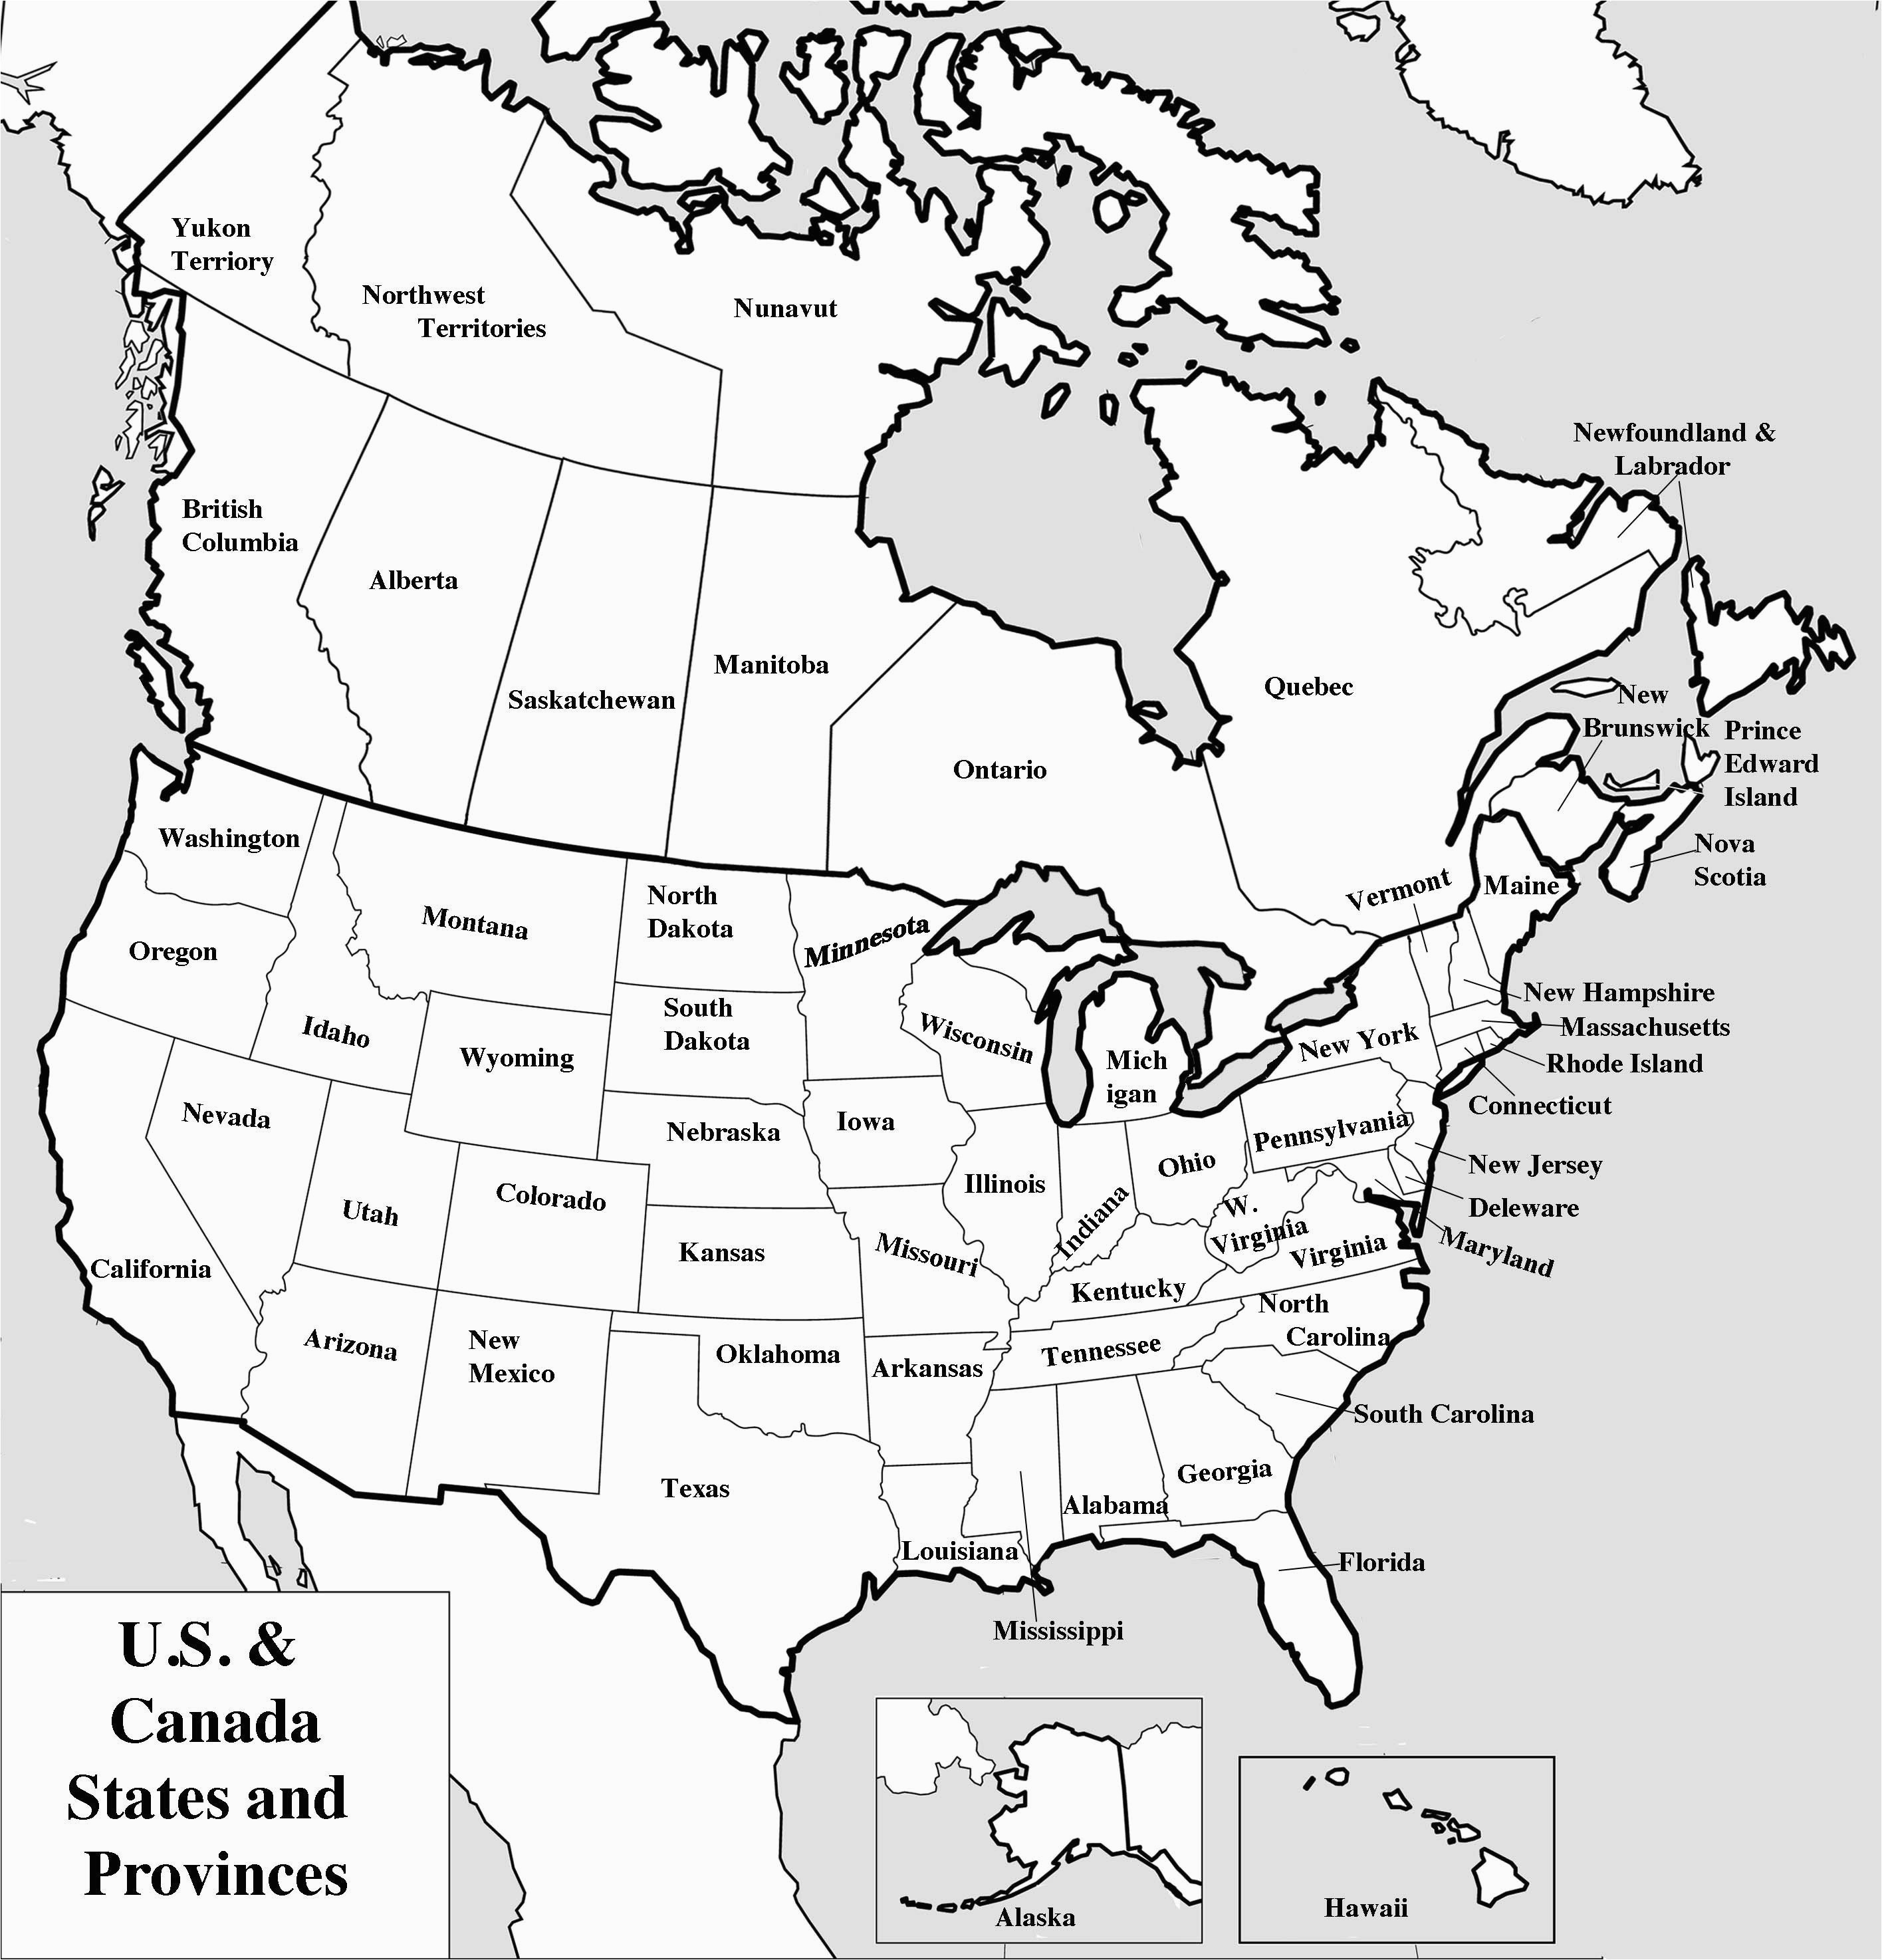 new blank map of the us and canada usacan58 passportstatus co